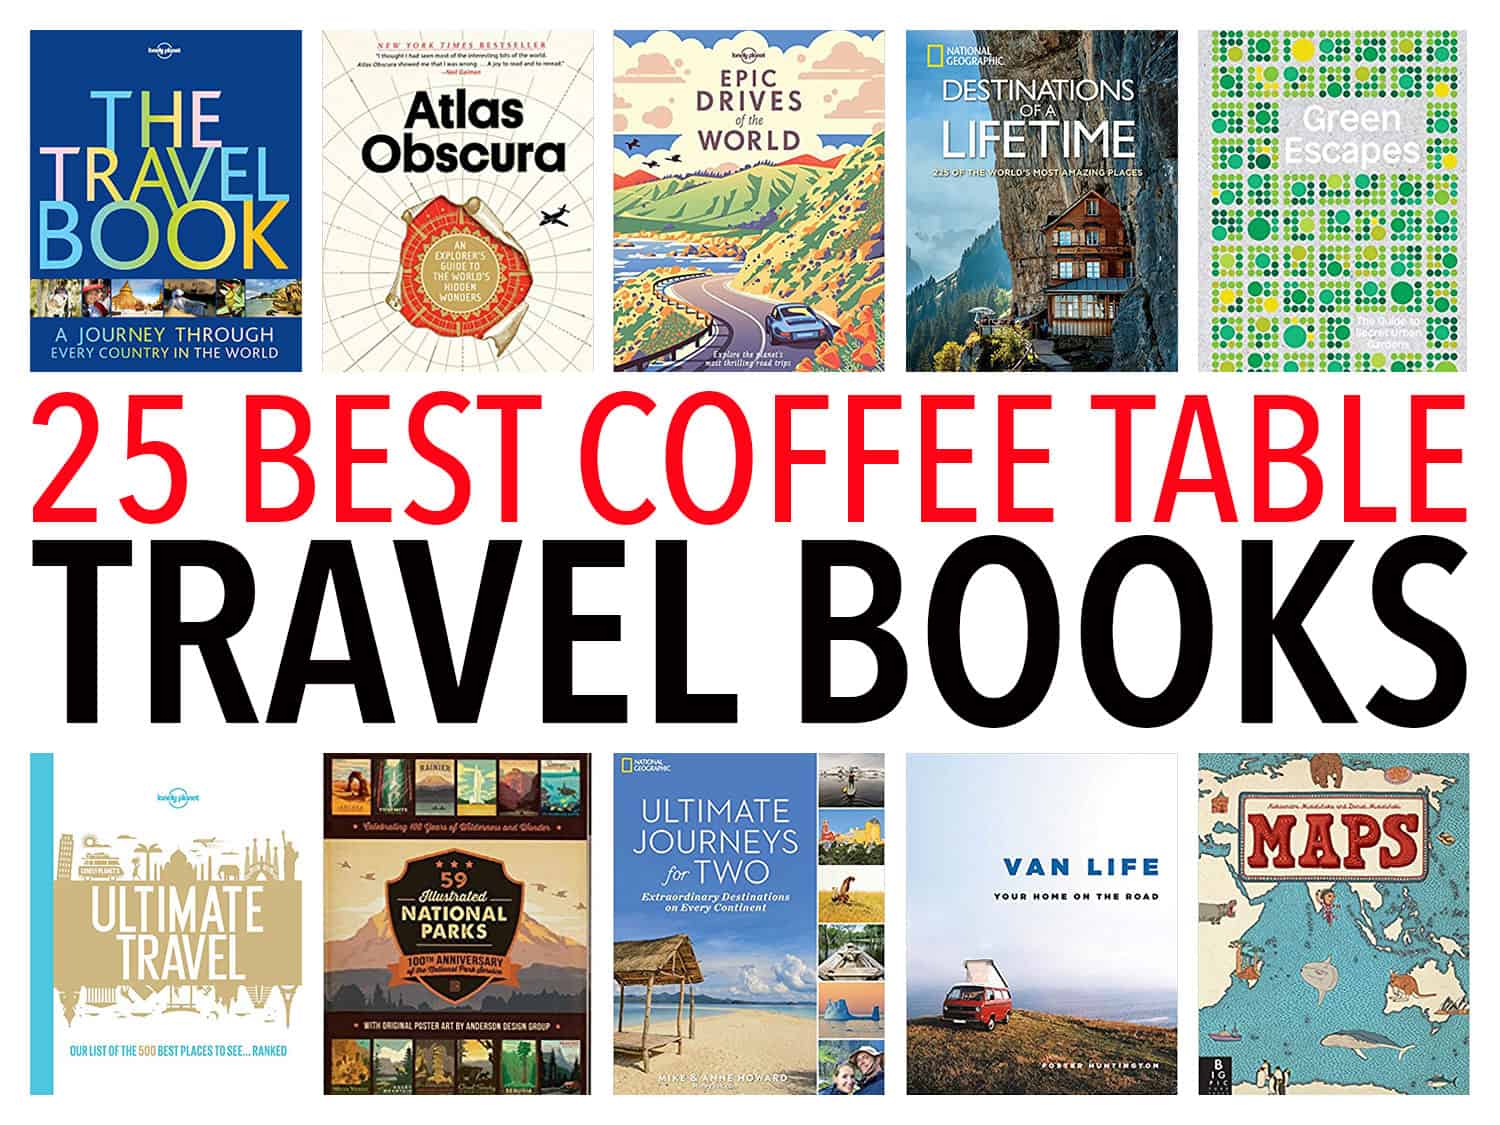 Inspiring Coffee Table Books for Trail and Ultra Runners: Our Top 5 Picks —  UltraRunning Destinations